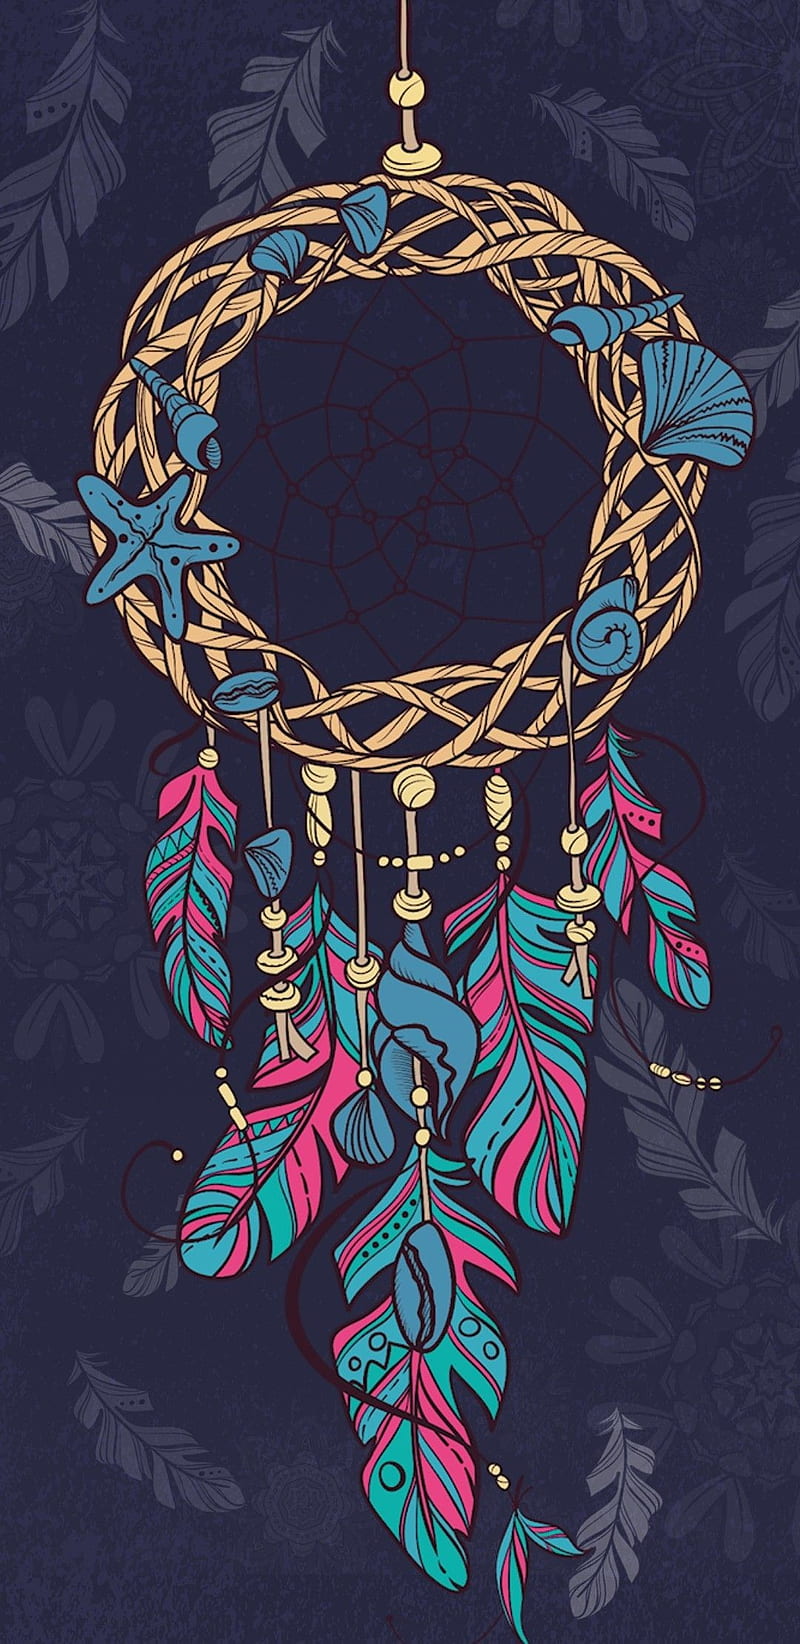 Dream Catcher Wall Decor | Wall Decor Products | Wall Decor Items | Body,  Mind & Soul Connection